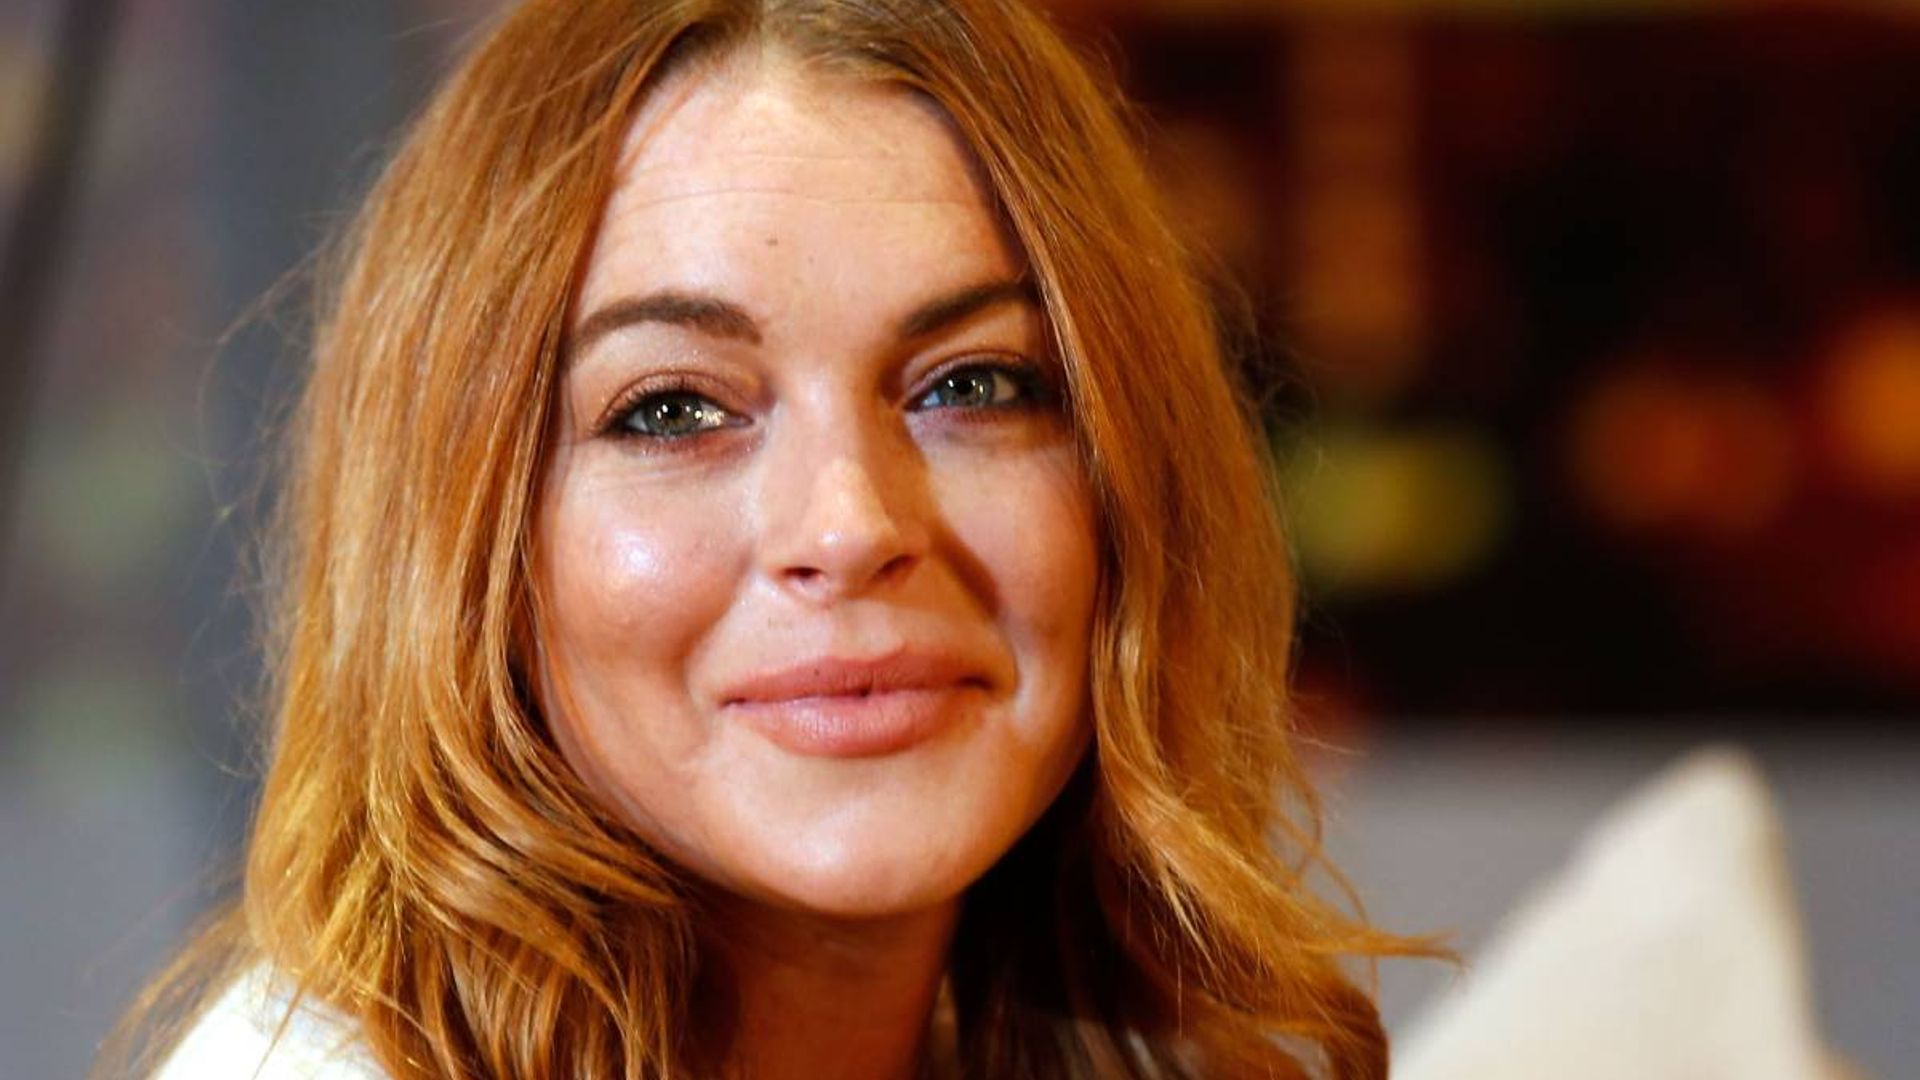 lindsay-lohan-personal-news-mom-shows-support